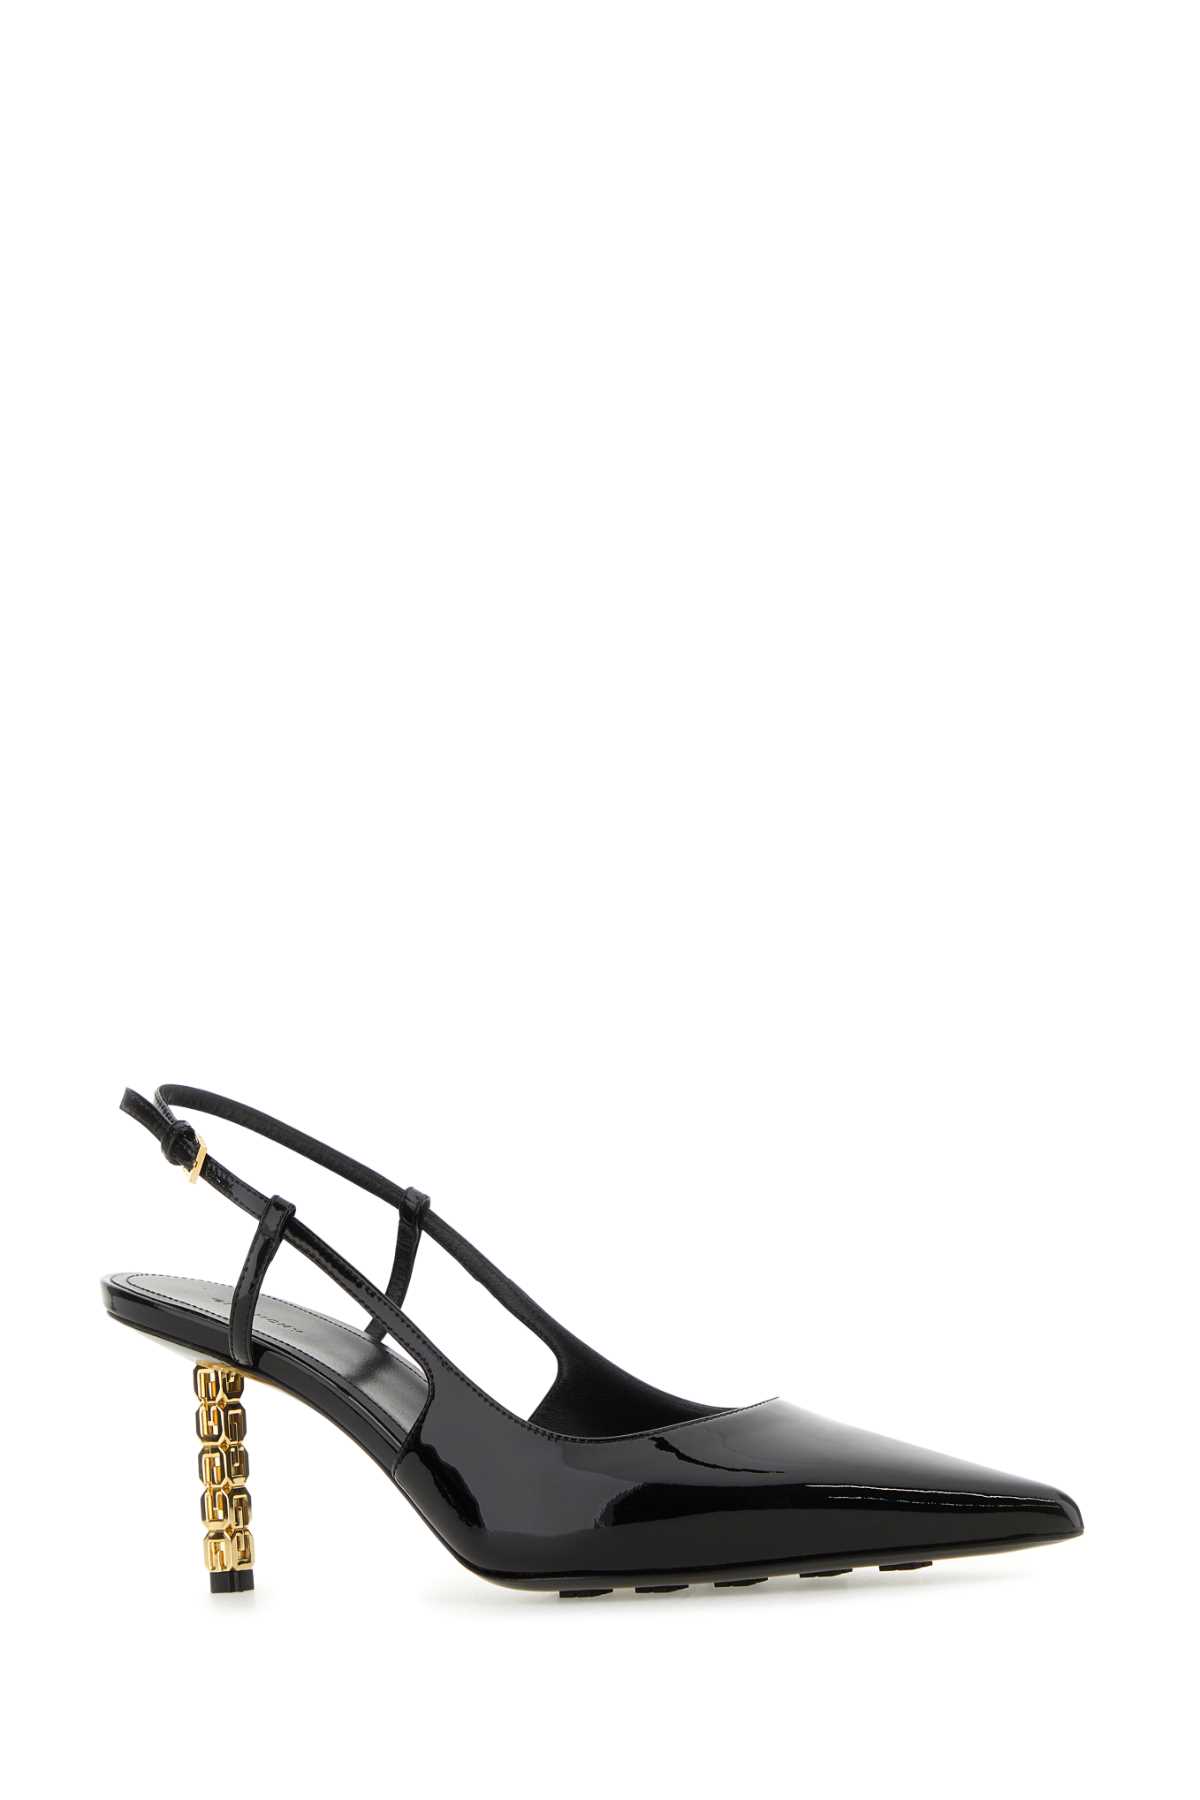 Givenchy Black Leather G-cube Pumps